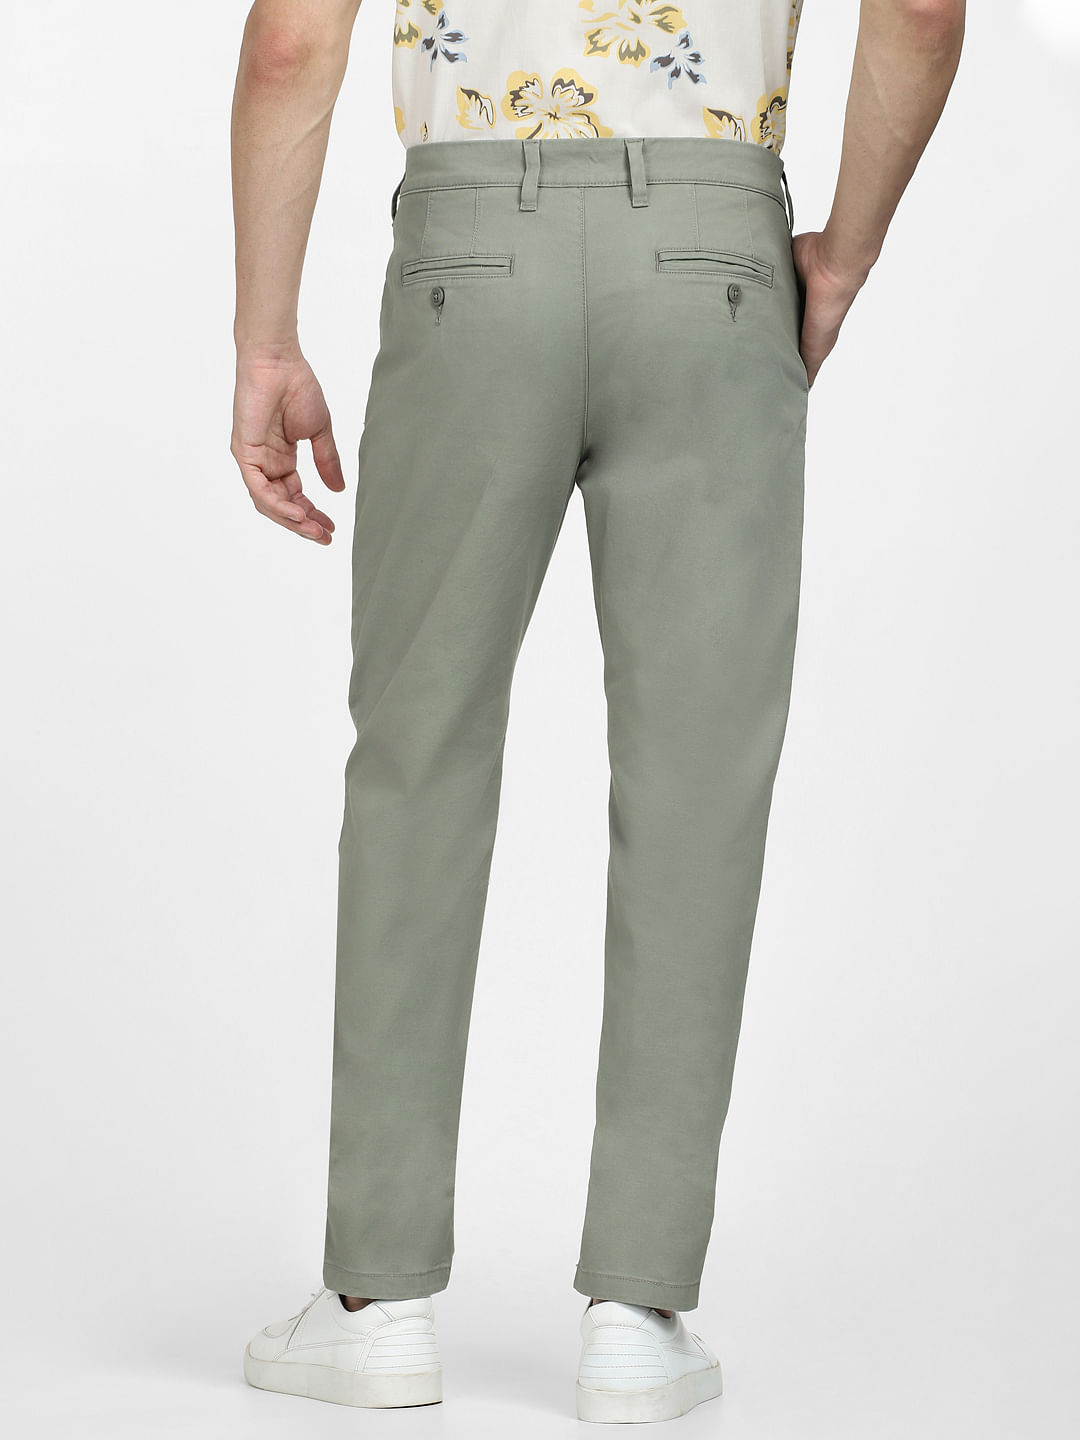 Shop Charlie Chino Pant - Army Green Online | 3 Wise Men NZ